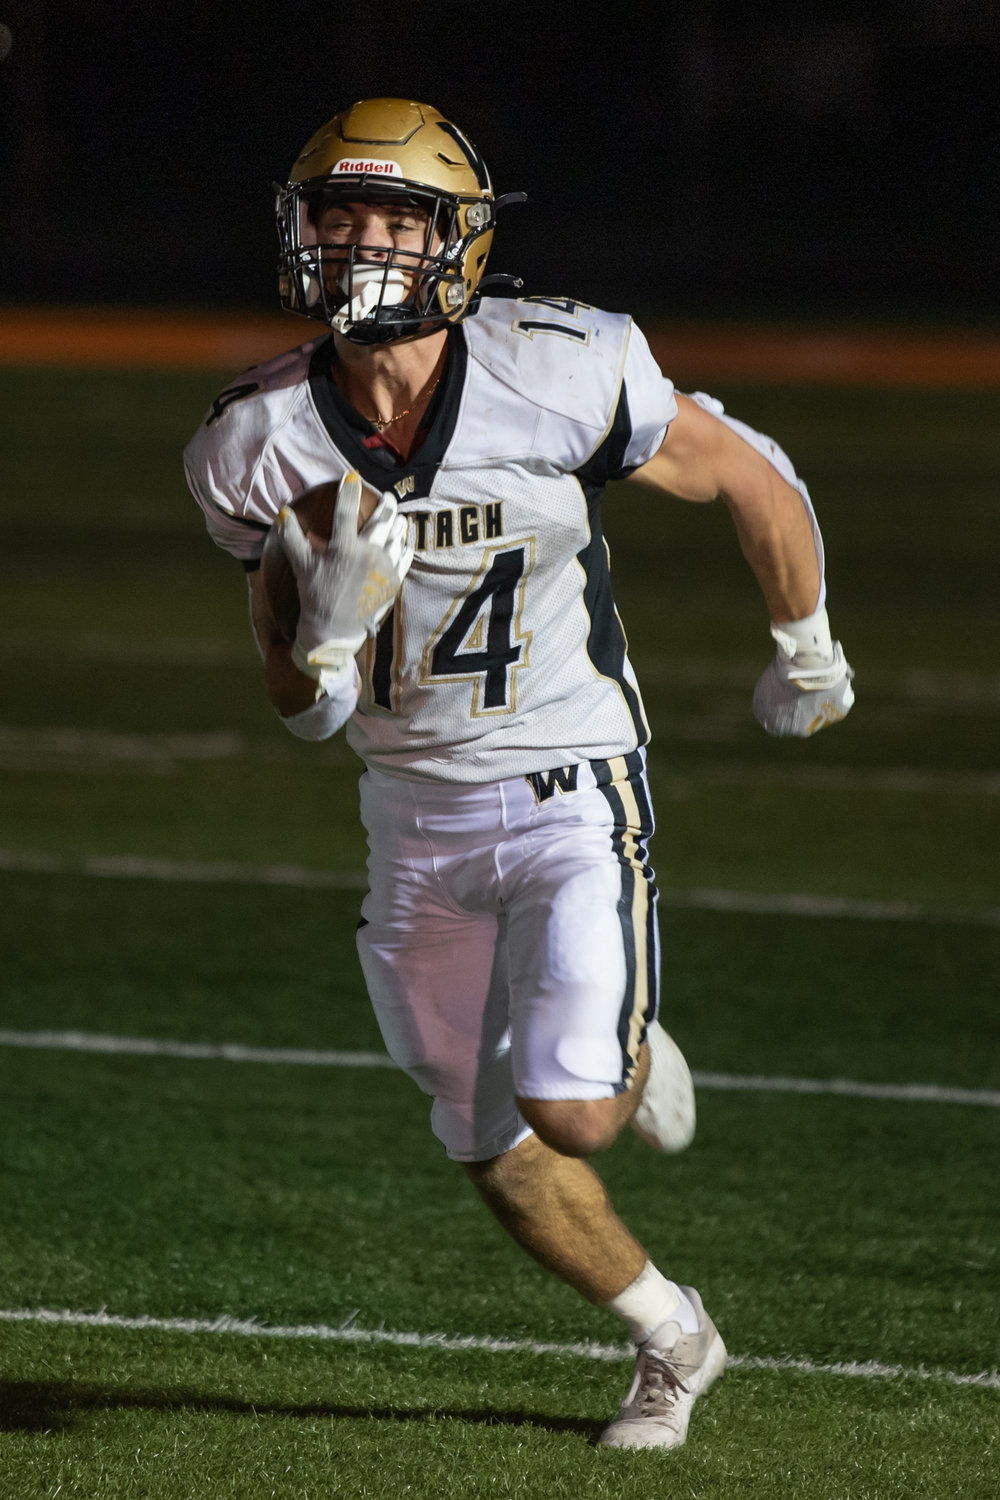 Senior Nick Cupelli was the catalyst in Wantagh’s 28-6 victory at Carey last Friday night with 267 yards rushing and three touchdowns.